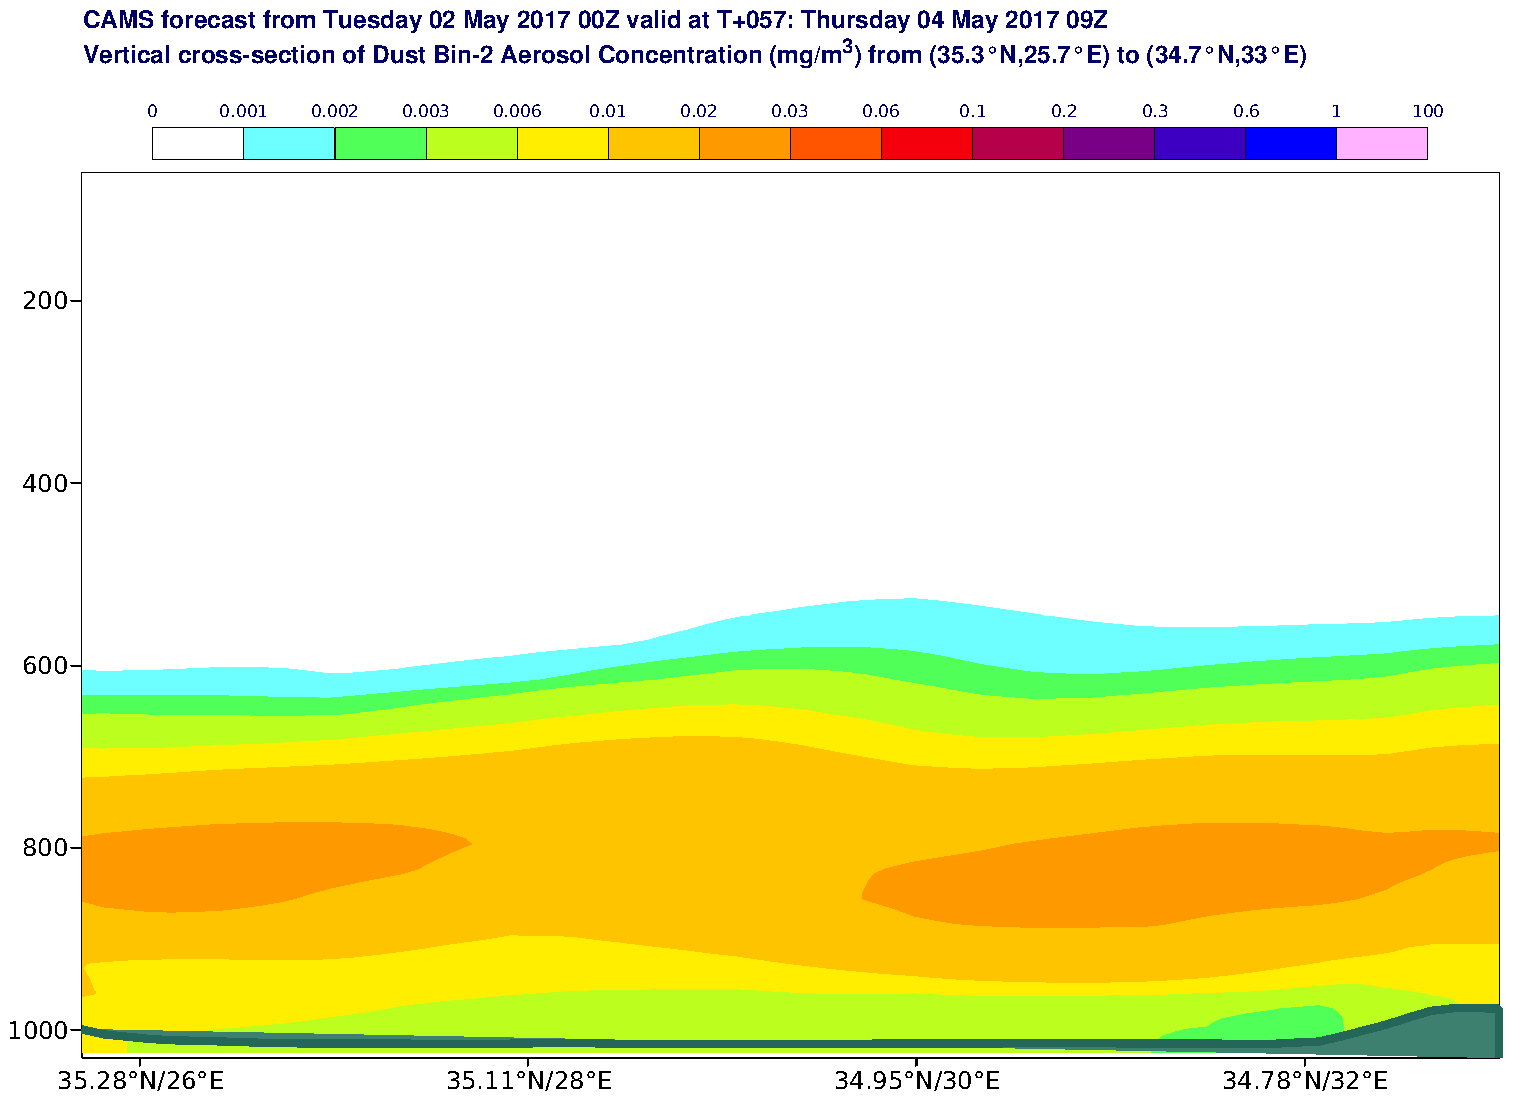 Vertical cross-section of Dust Bin-2 Aerosol Concentration (mg/m3) valid at T57 - 2017-05-04 09:00